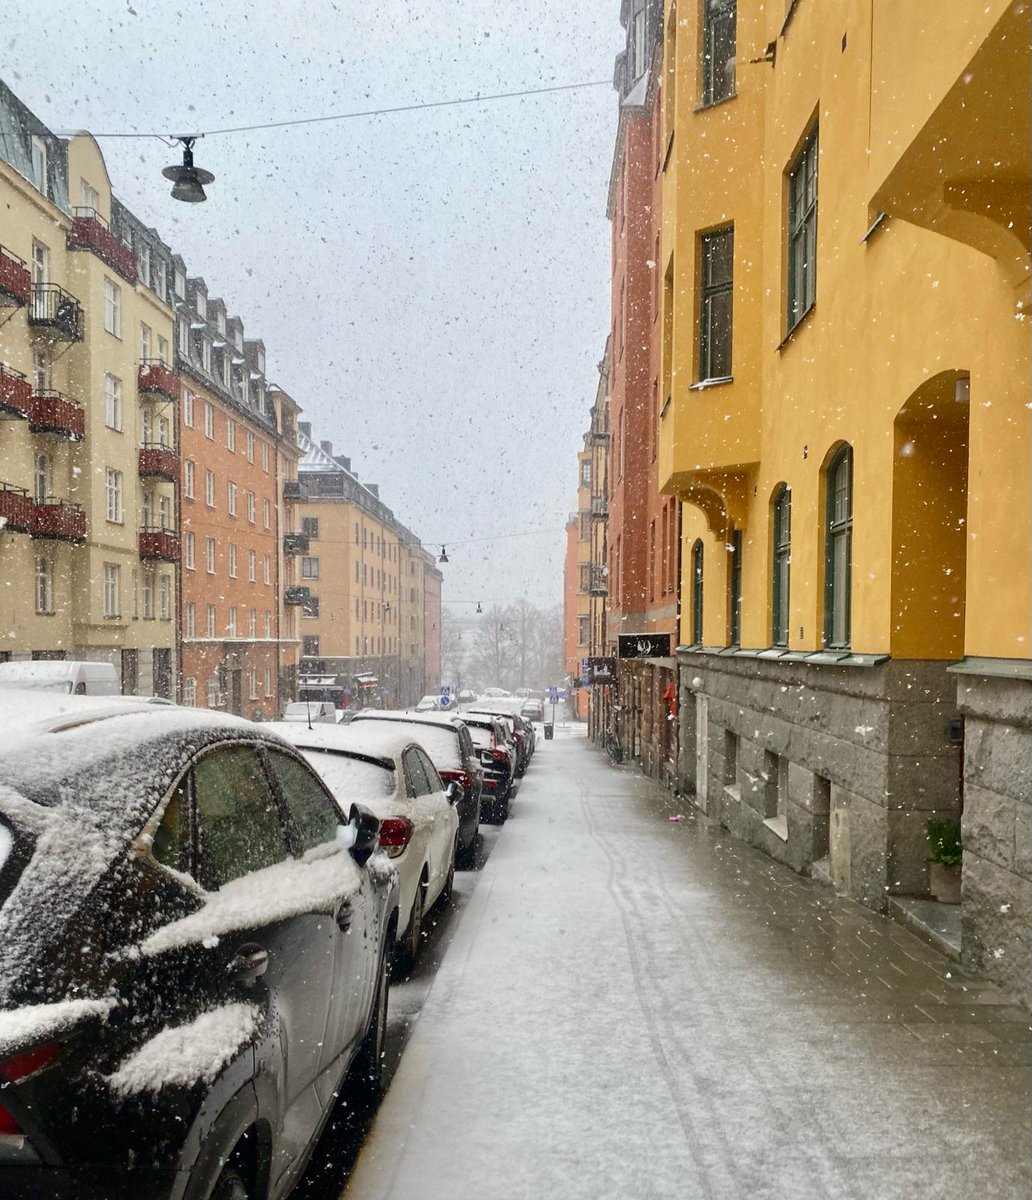 Spring in Stockholm. This still charms me (for now).